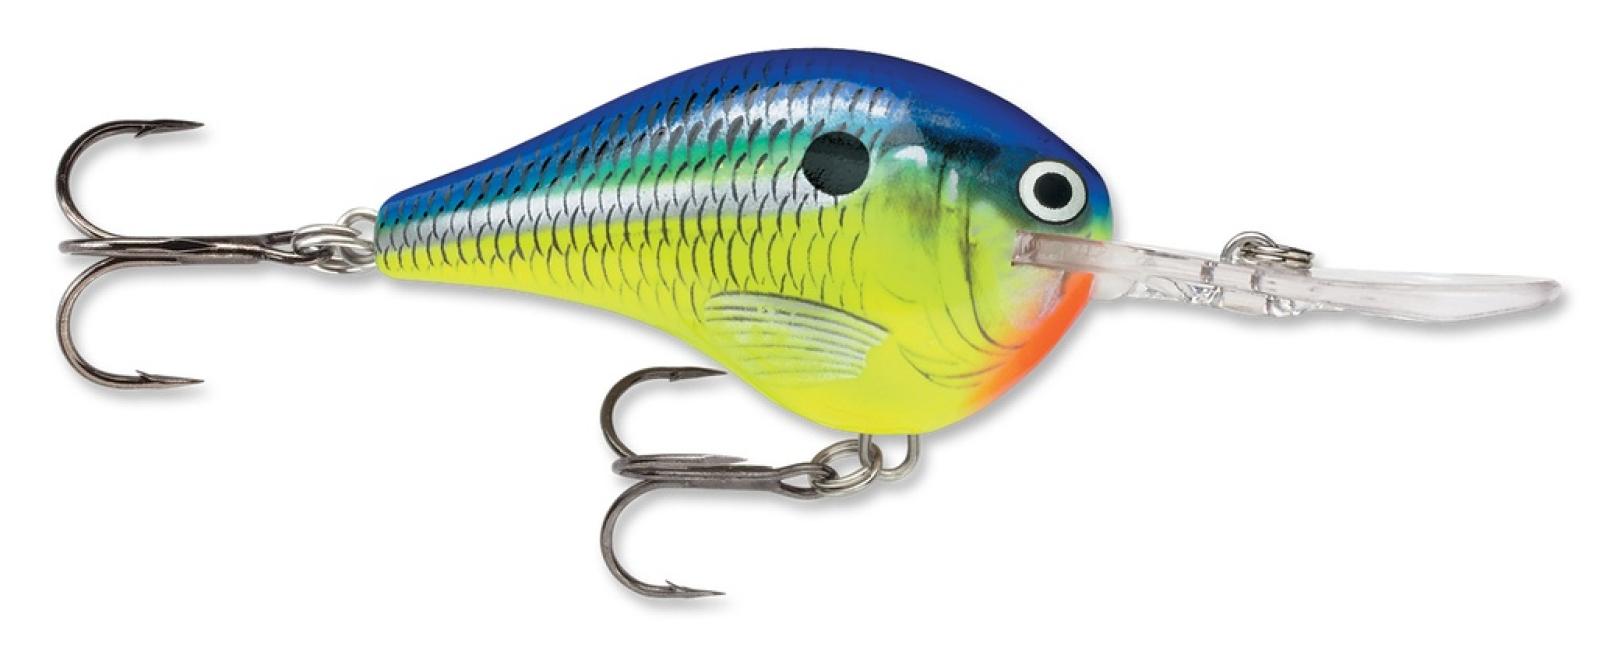 Rapala DT (Dives-To) Series Parrot